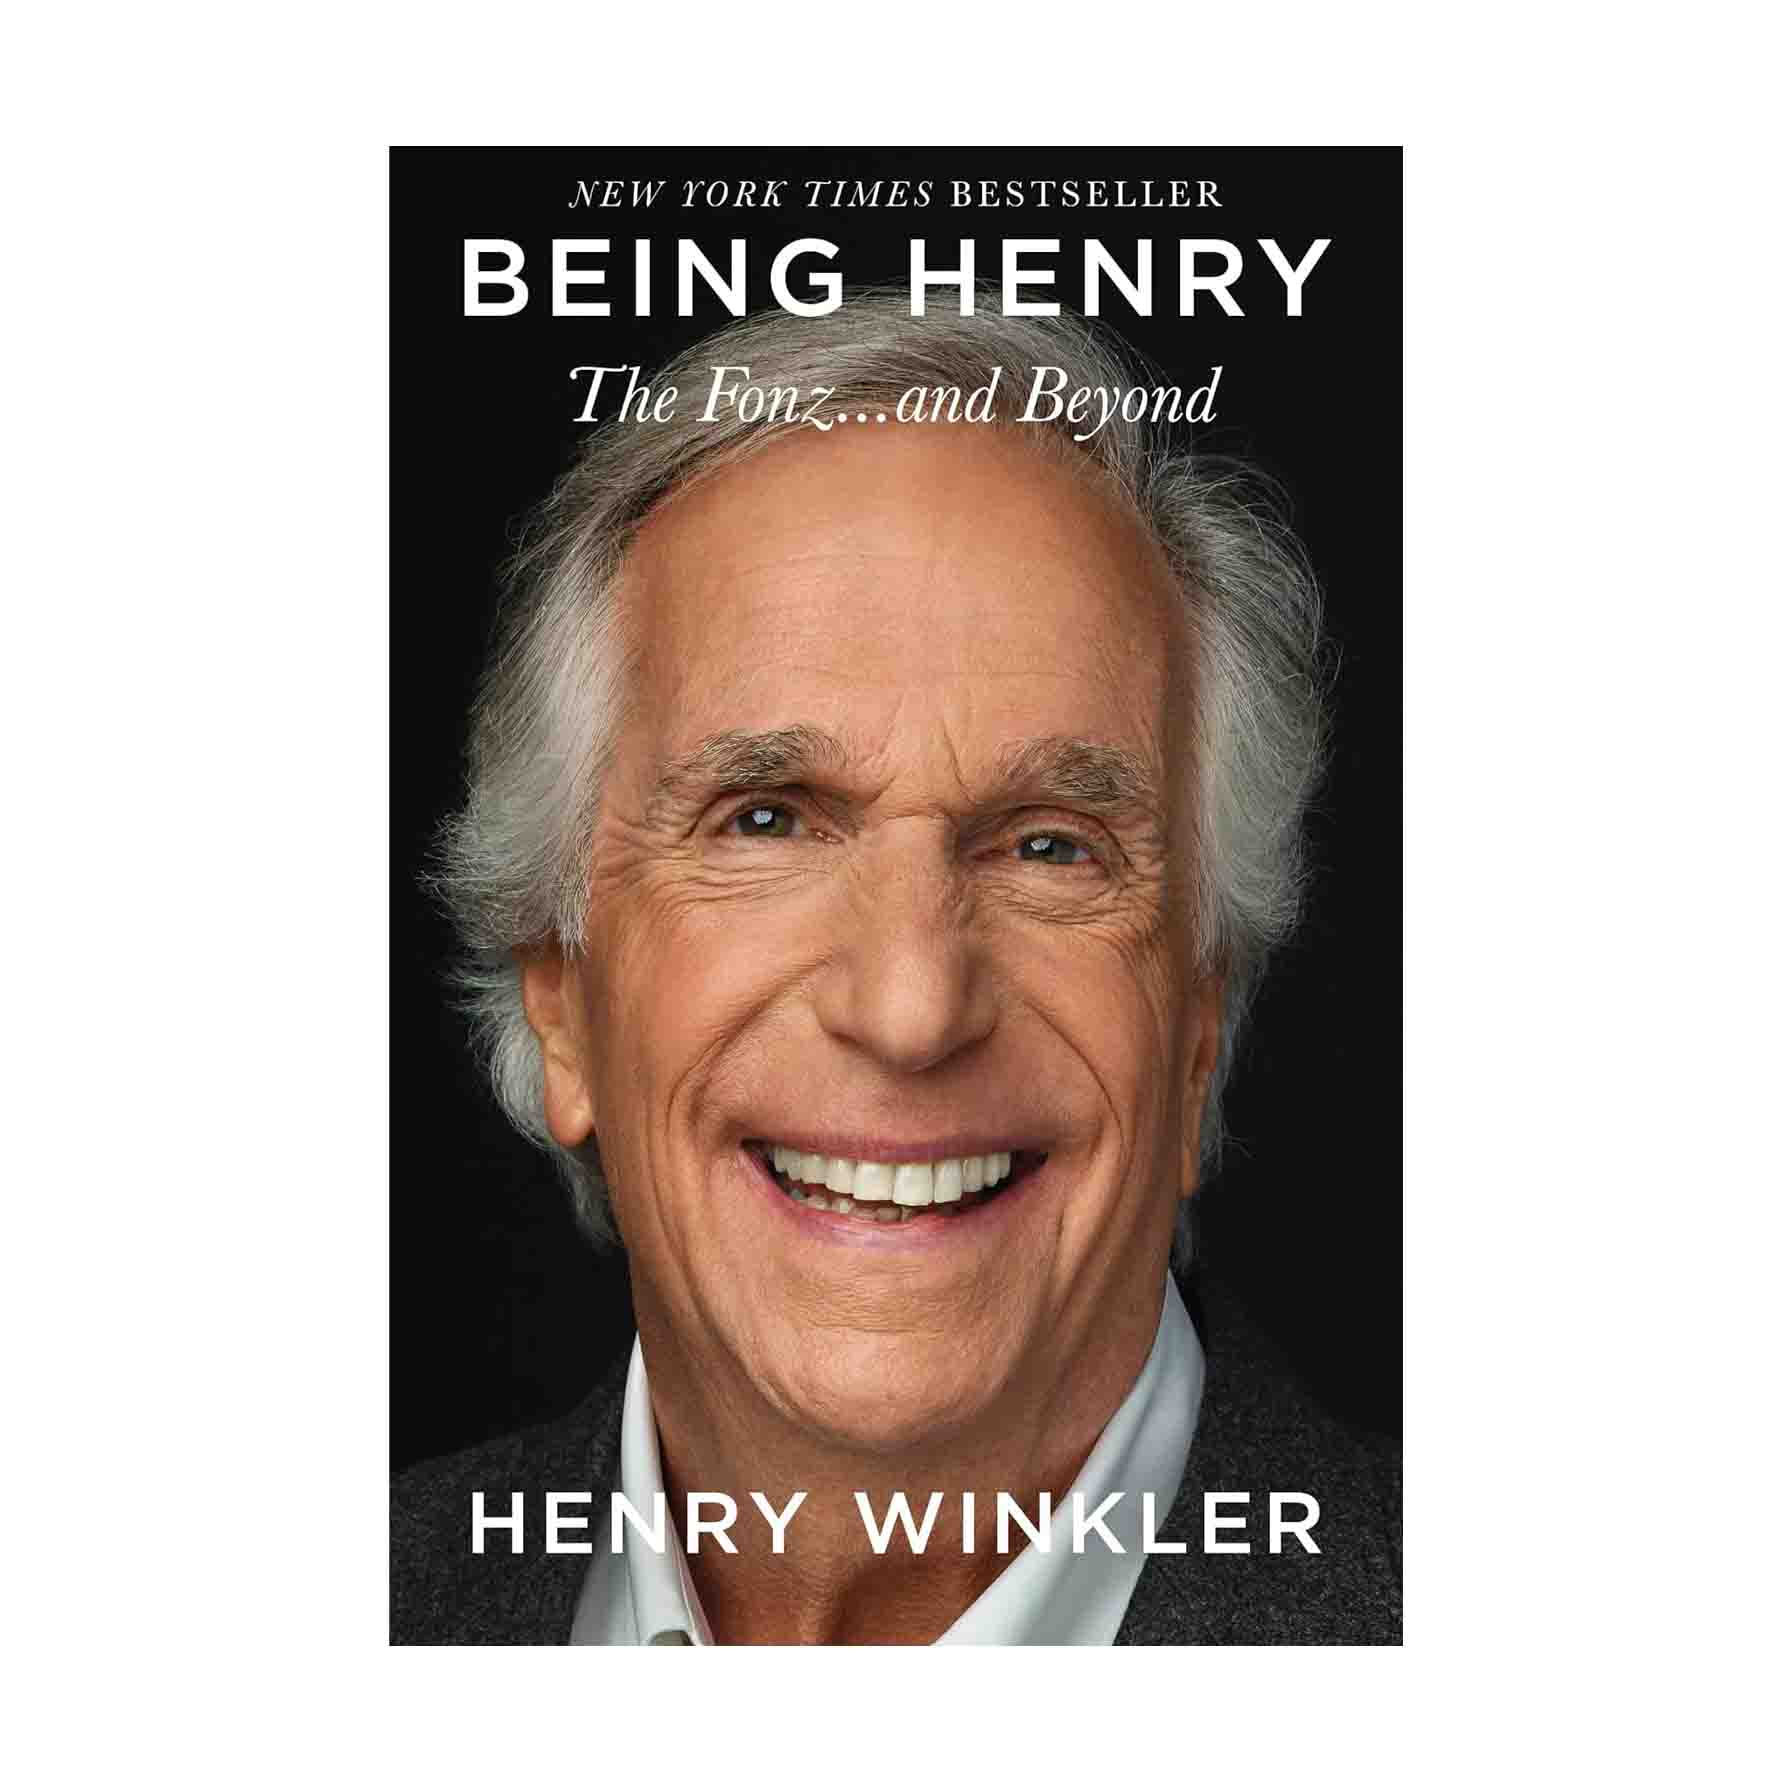 book titled Being Henry: The Fonz with a portrait of Henry Winkler